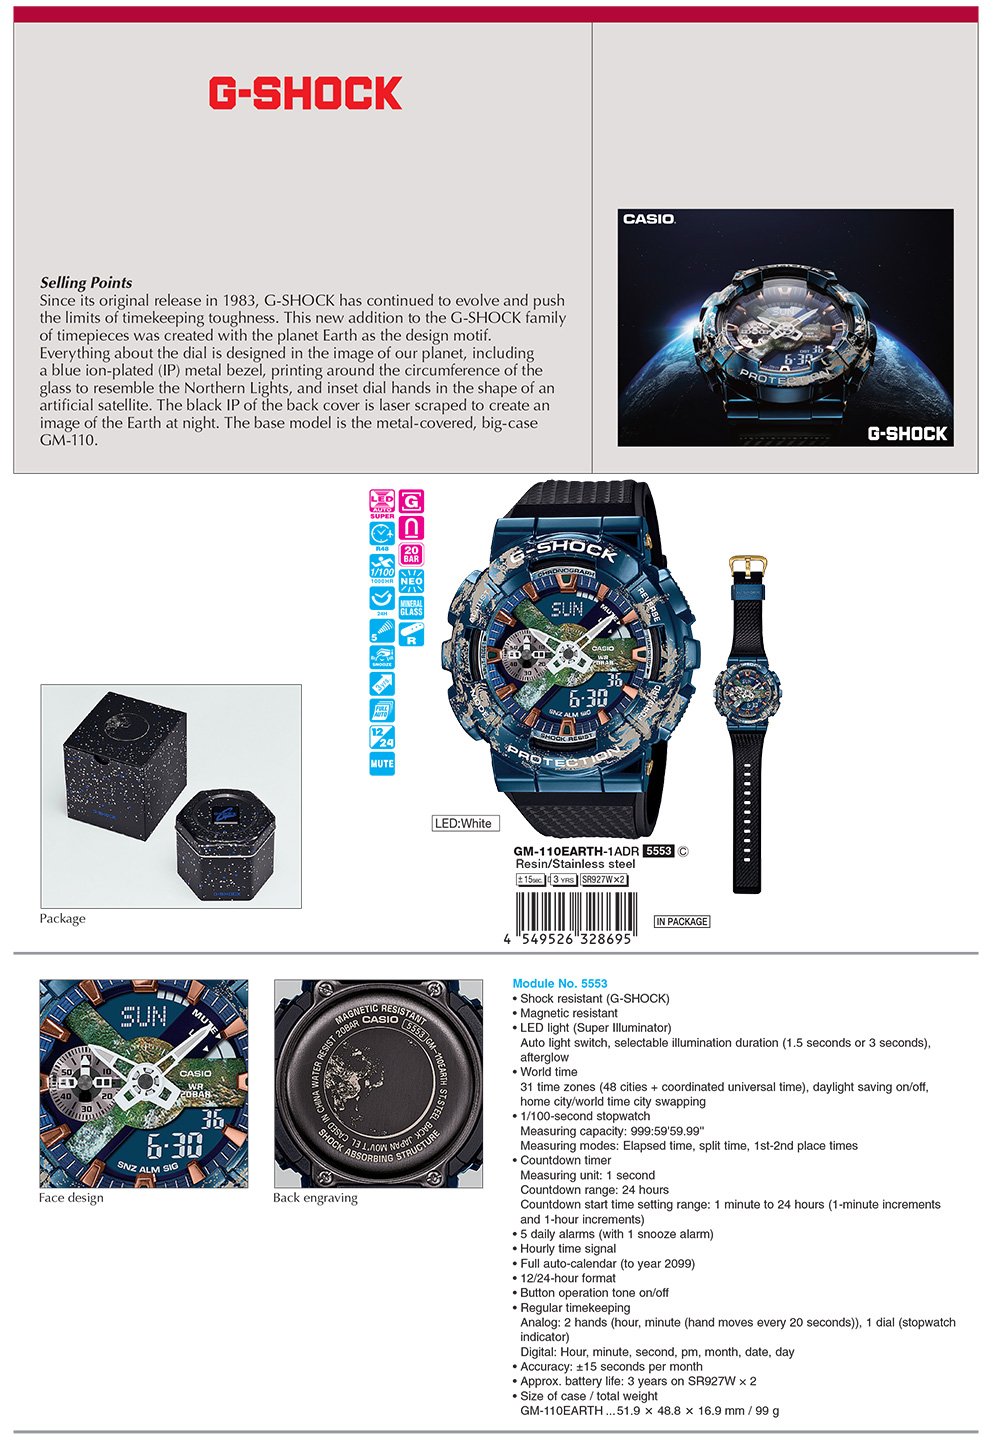 G-Shock, Planet, Earth-inspired, blue ion plating, GM-110EARTH-1A